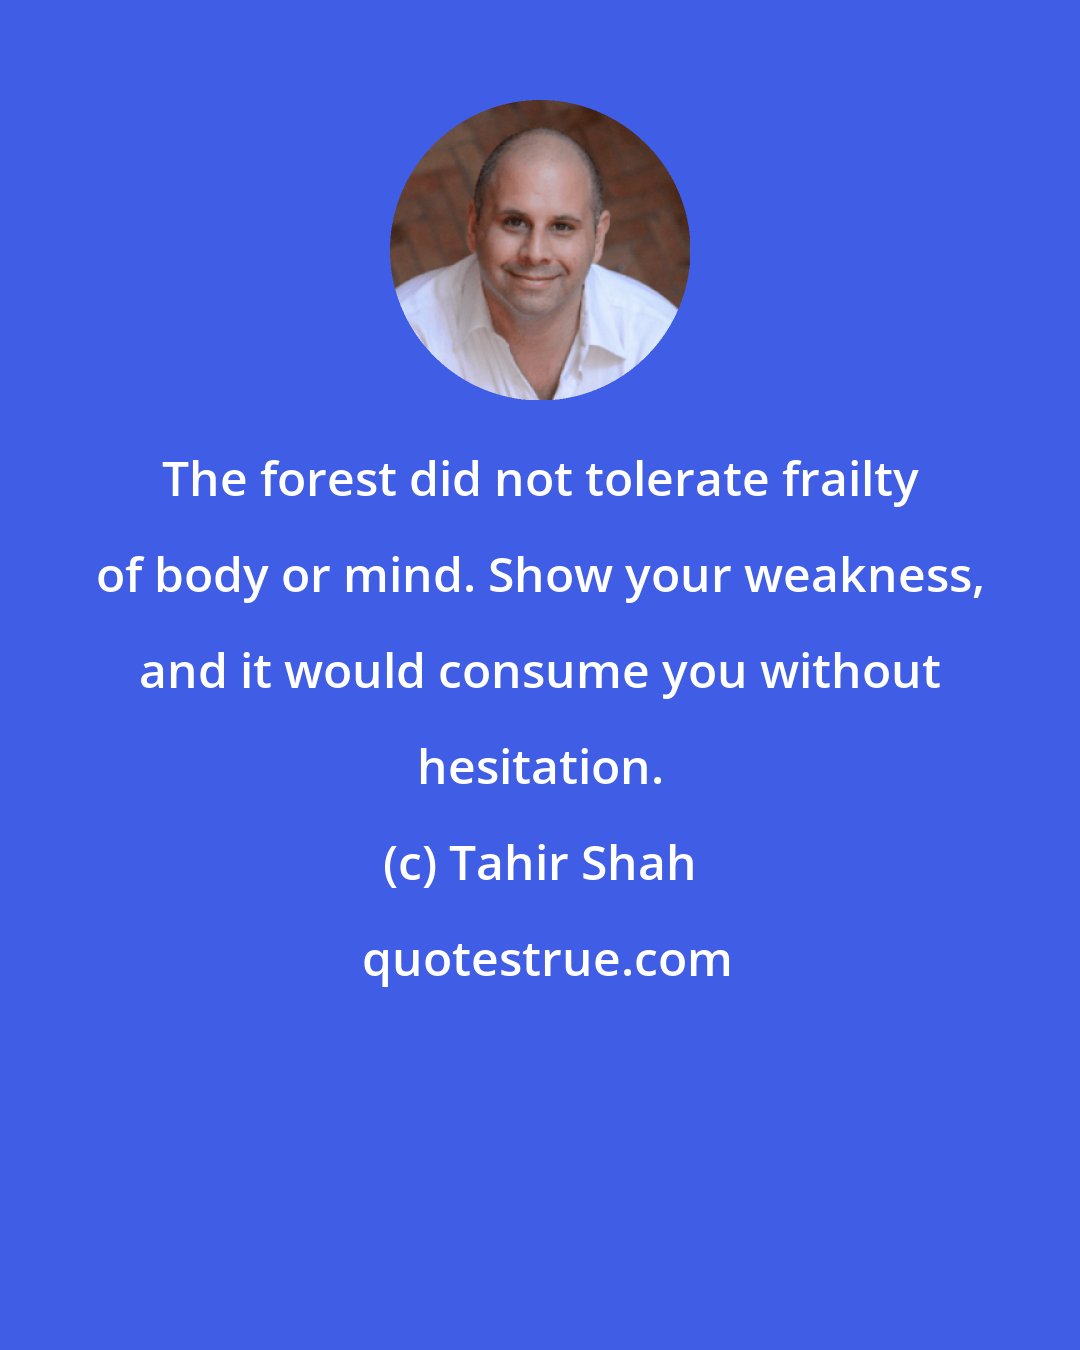 Tahir Shah: The forest did not tolerate frailty of body or mind. Show your weakness, and it would consume you without hesitation.